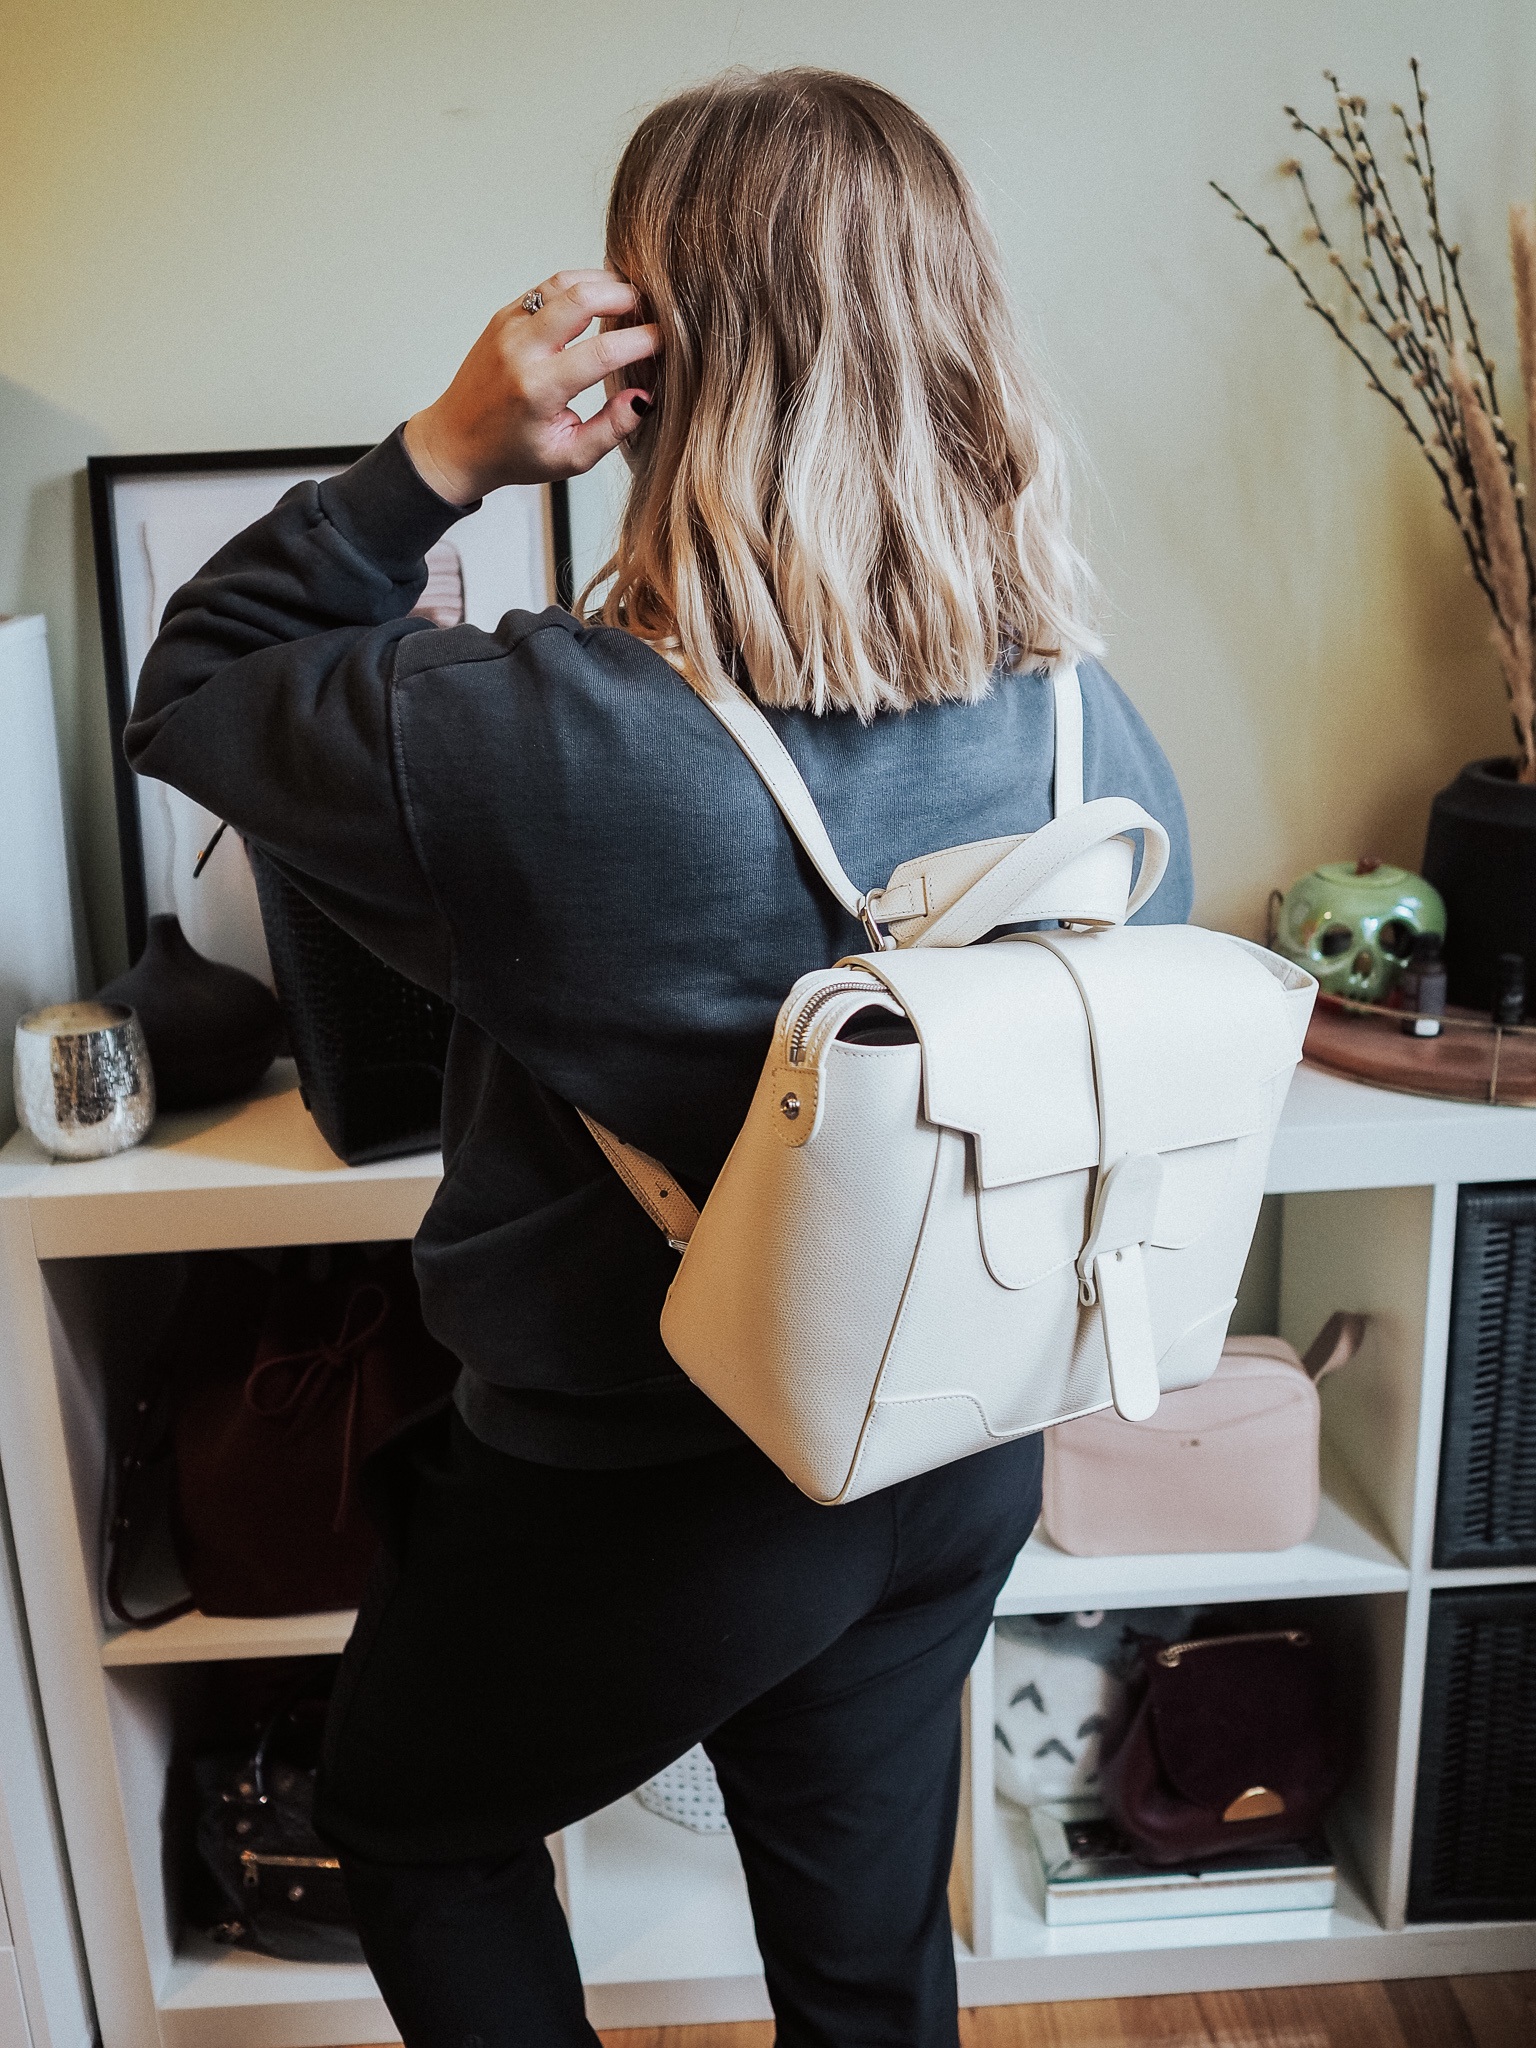 Find out if the Senreve Maestra bag is worth the price in this thorough Senreve review by Kelsey of Blondes and Bagels!